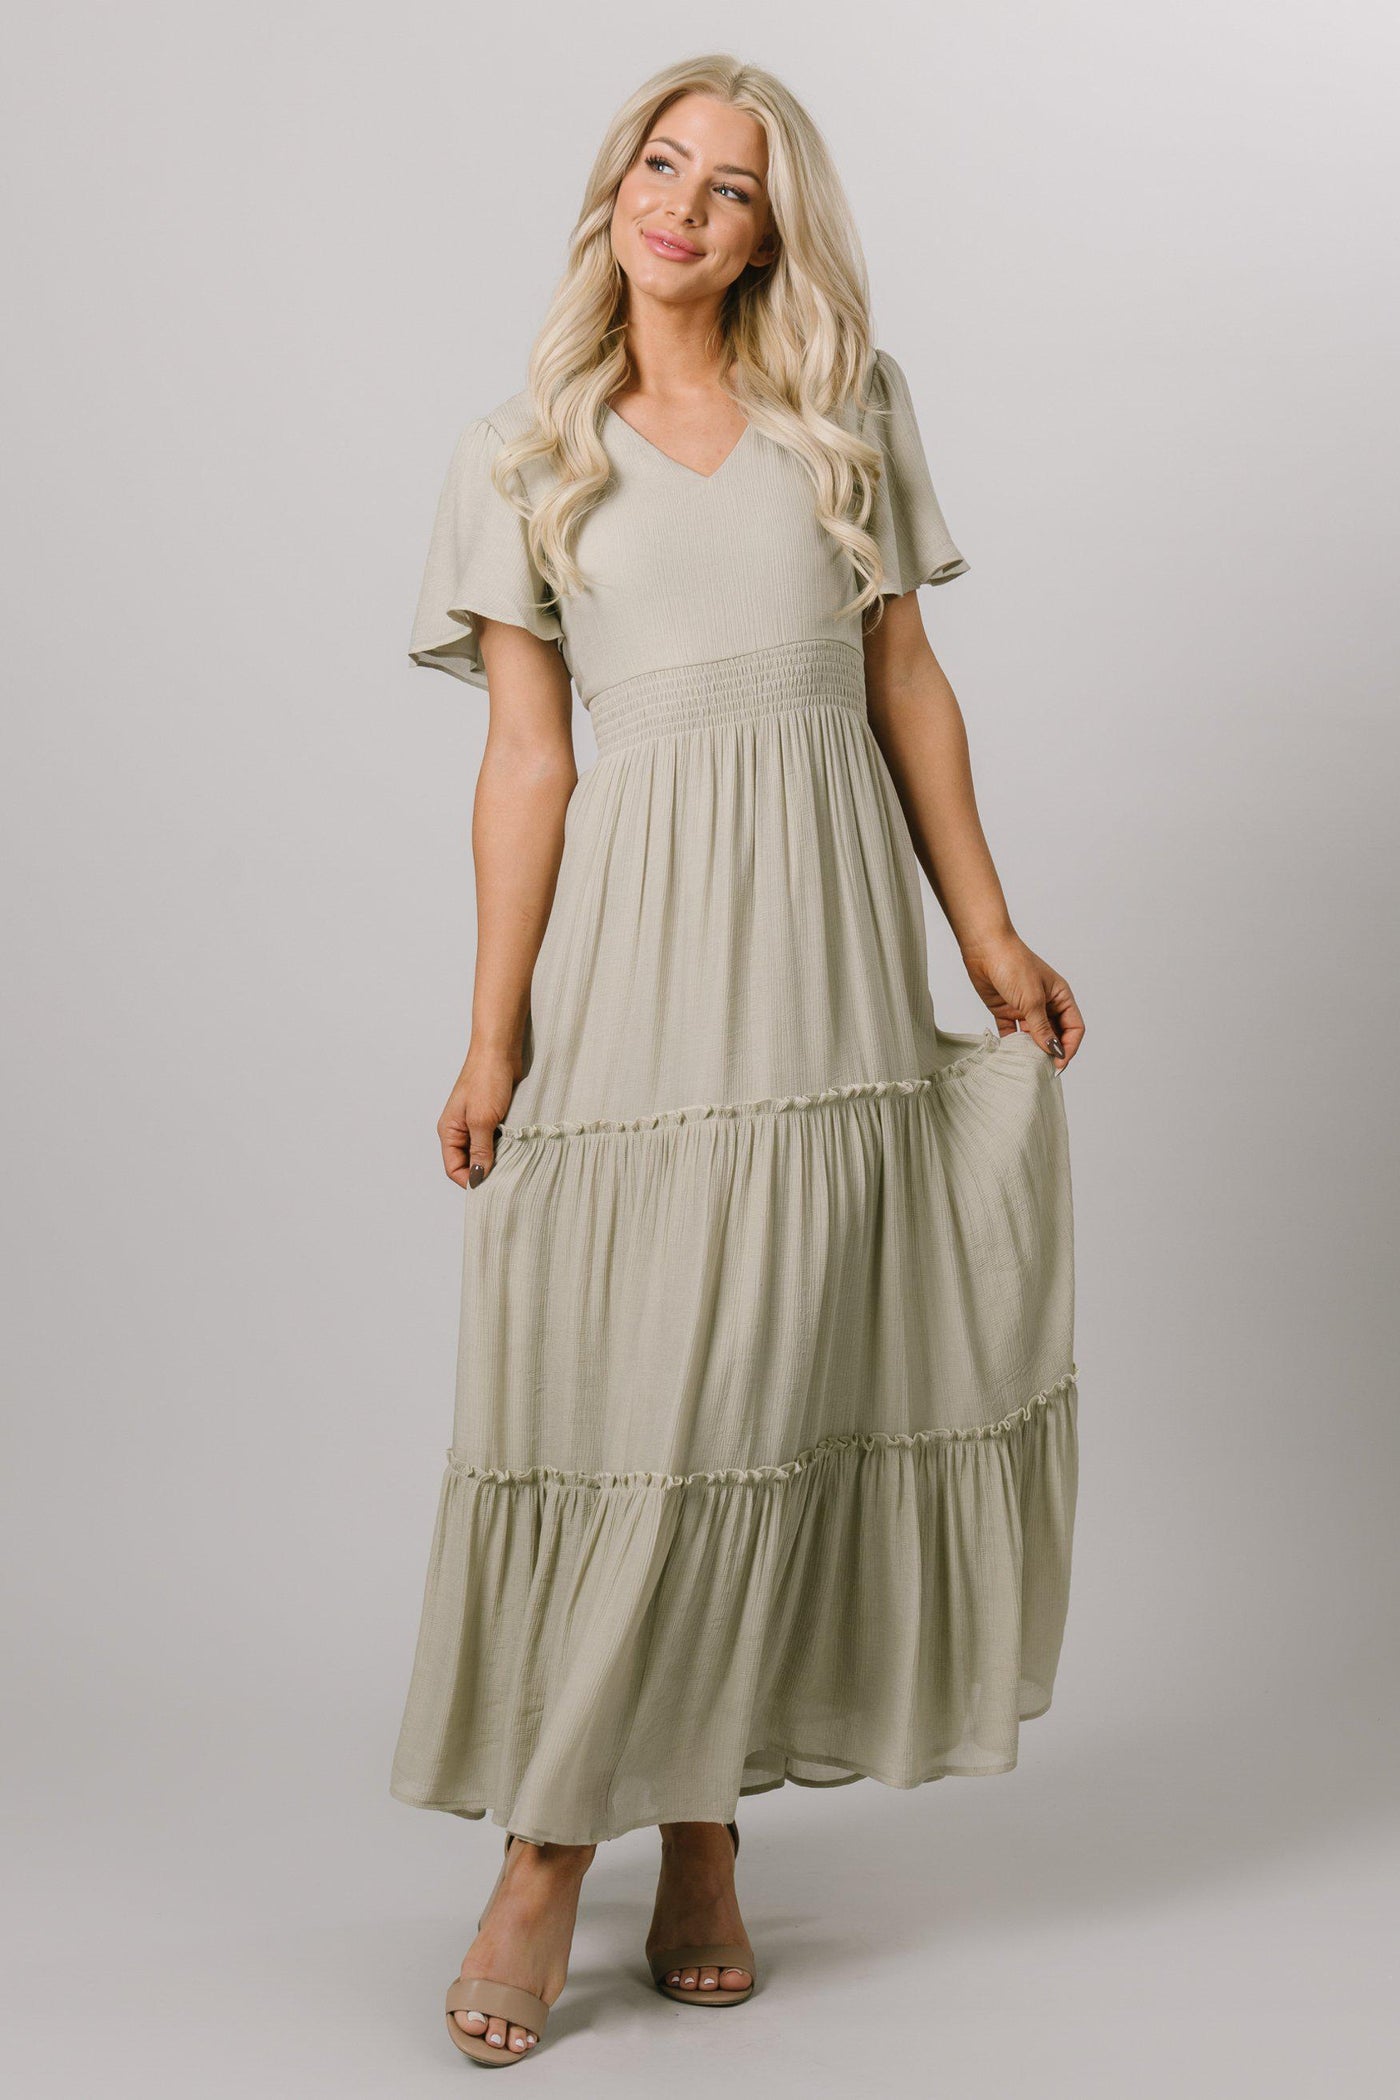 Modest Dresses - Modest Clothing - Everyday Modest Dresses - Bridesmaid Modest Dresses.  The model is wearing a size small. This ankle length dress featues a v-neckline, long flutter sleeves with a flowy bottom. 